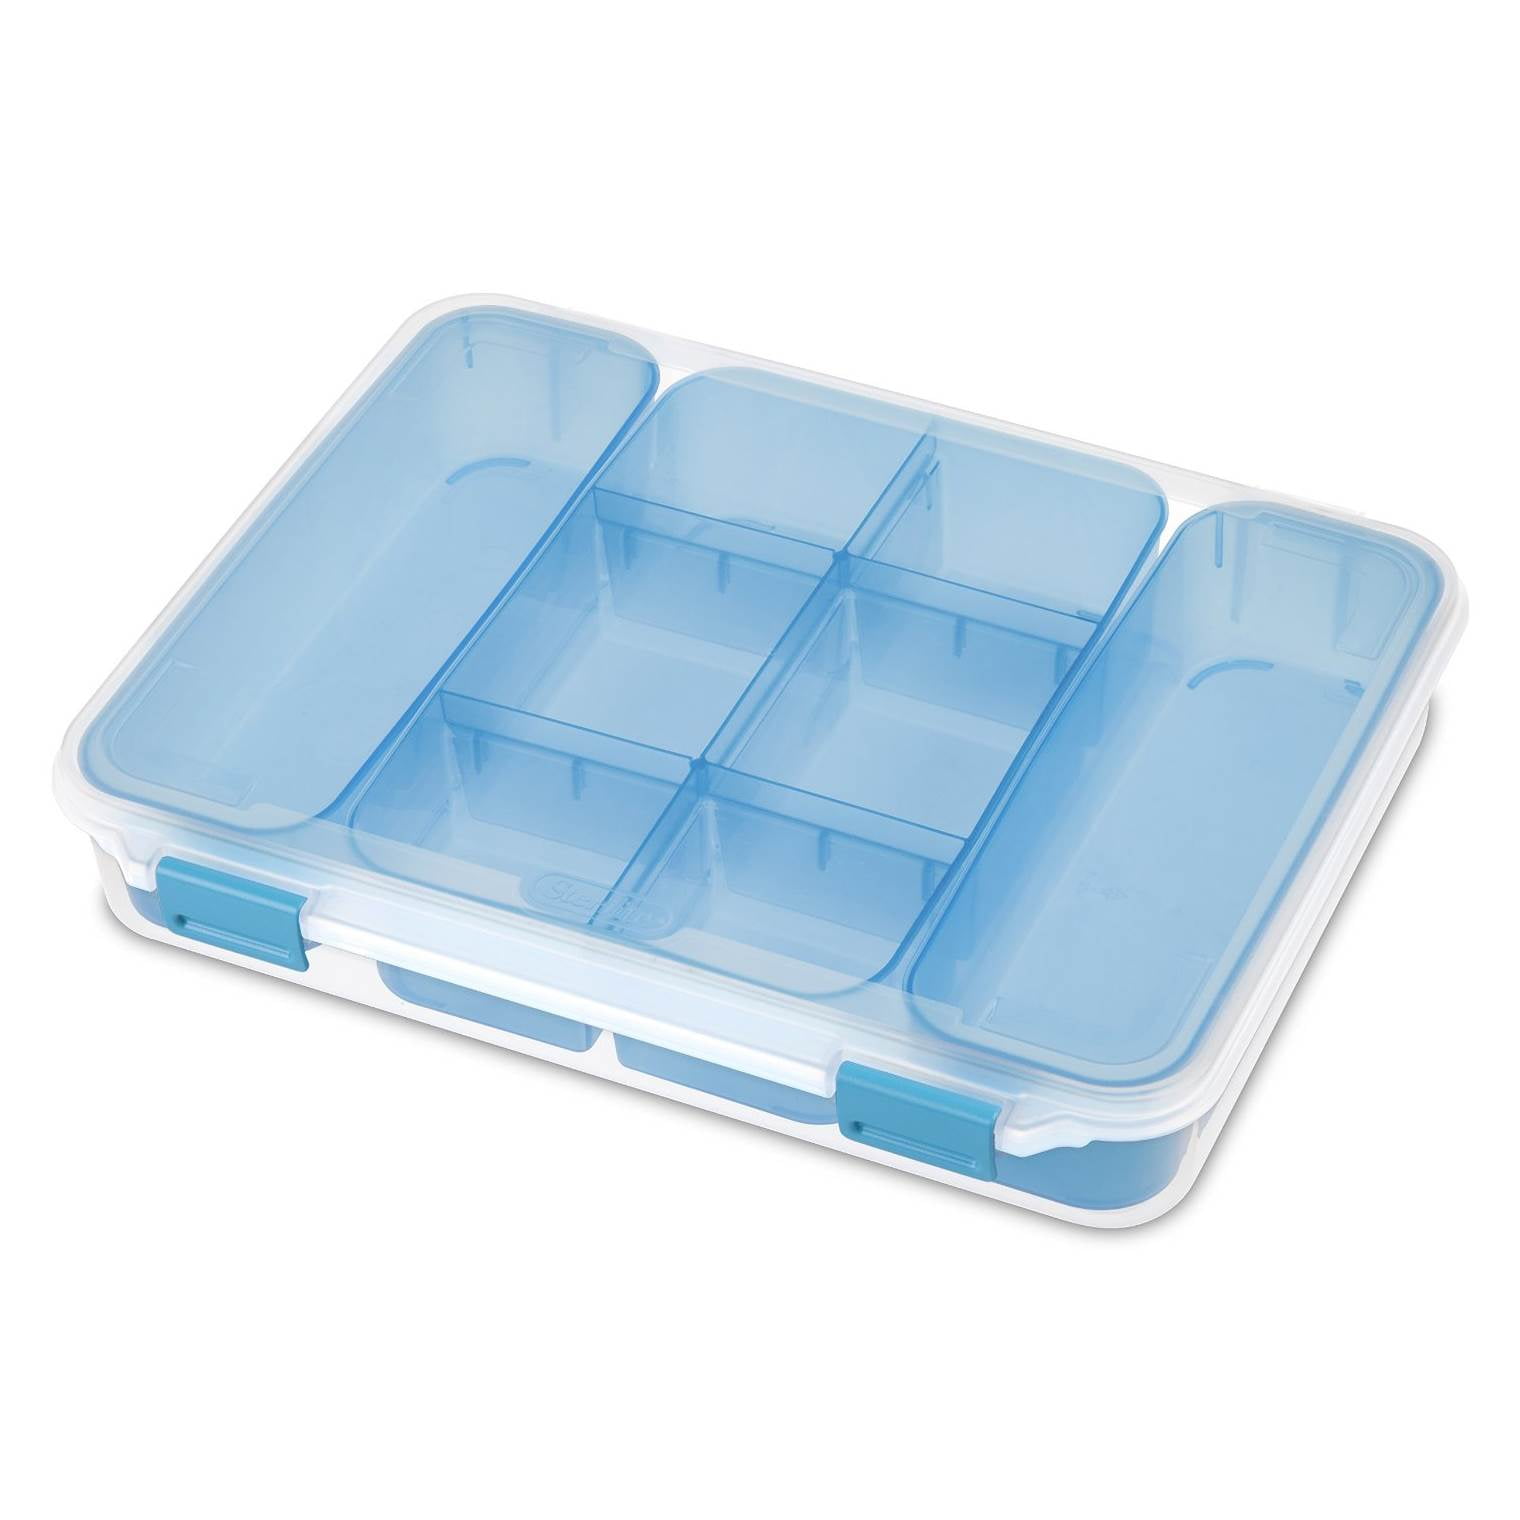 Sterilite Divided Case Stackable Plastic Small Storage Lidded